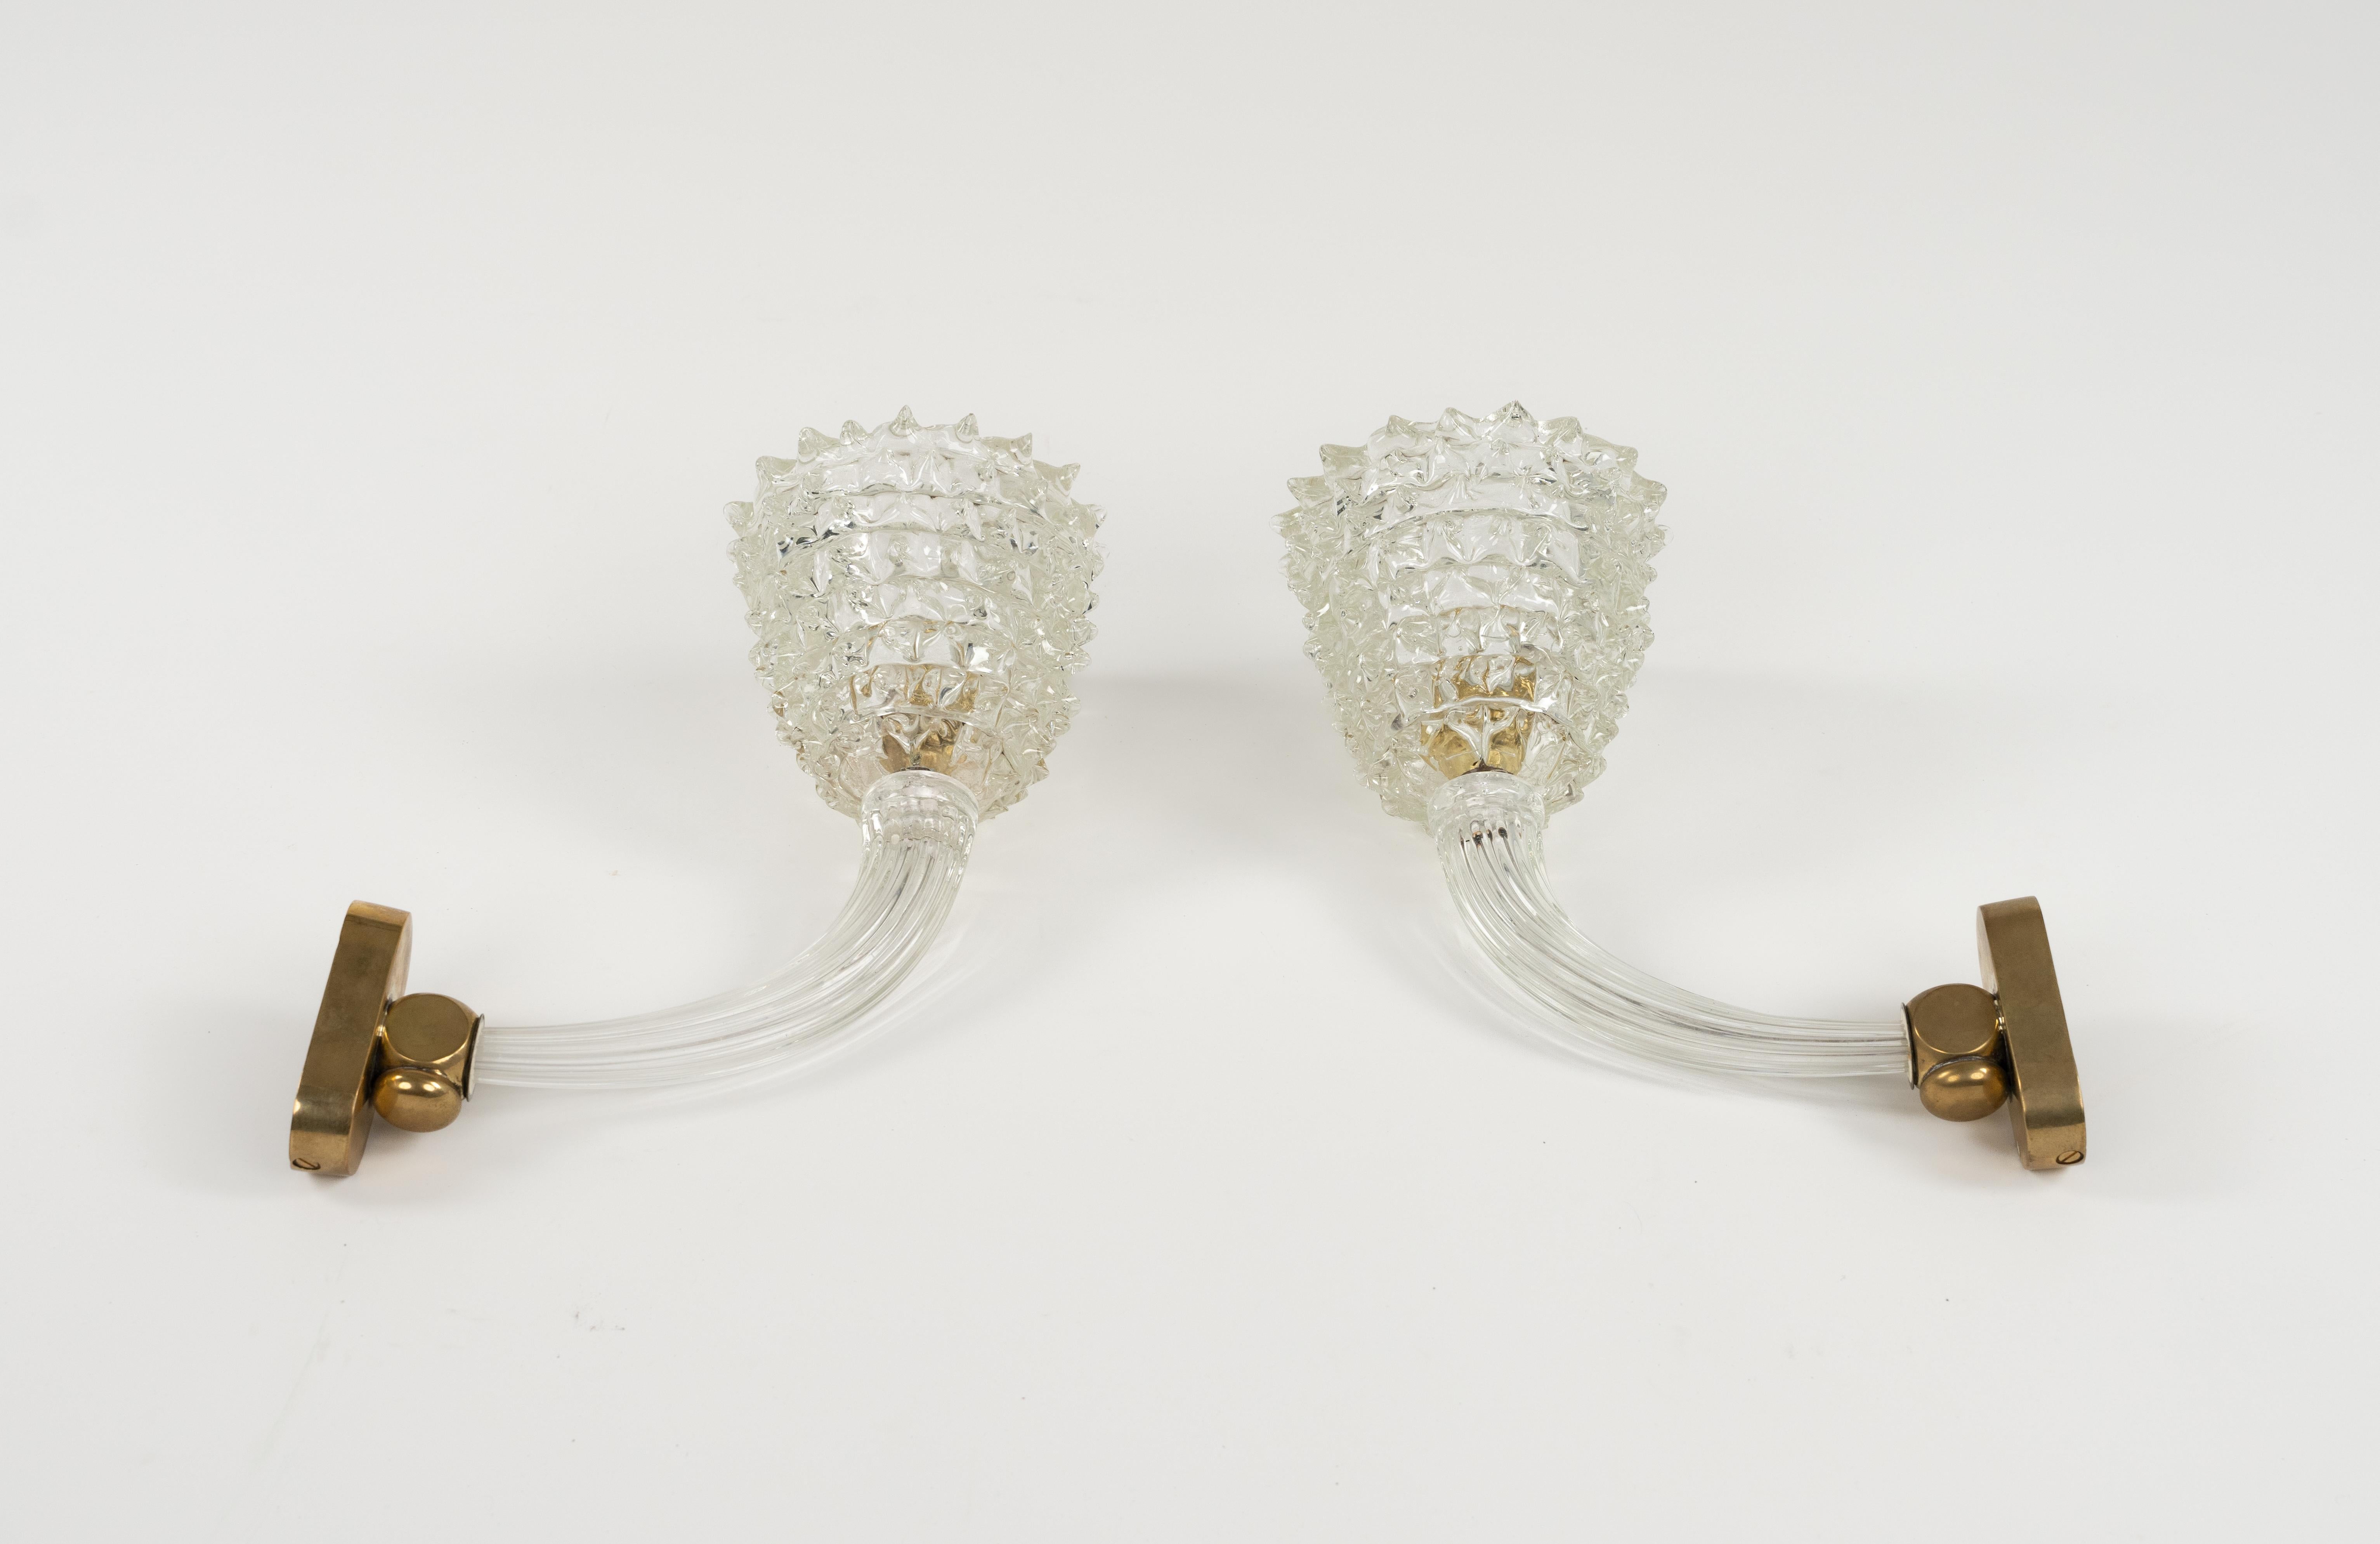 Italian Pair of Sconces Rostrato Murano Glass & Brass Barovier & Toso Style, Italy 1950s For Sale